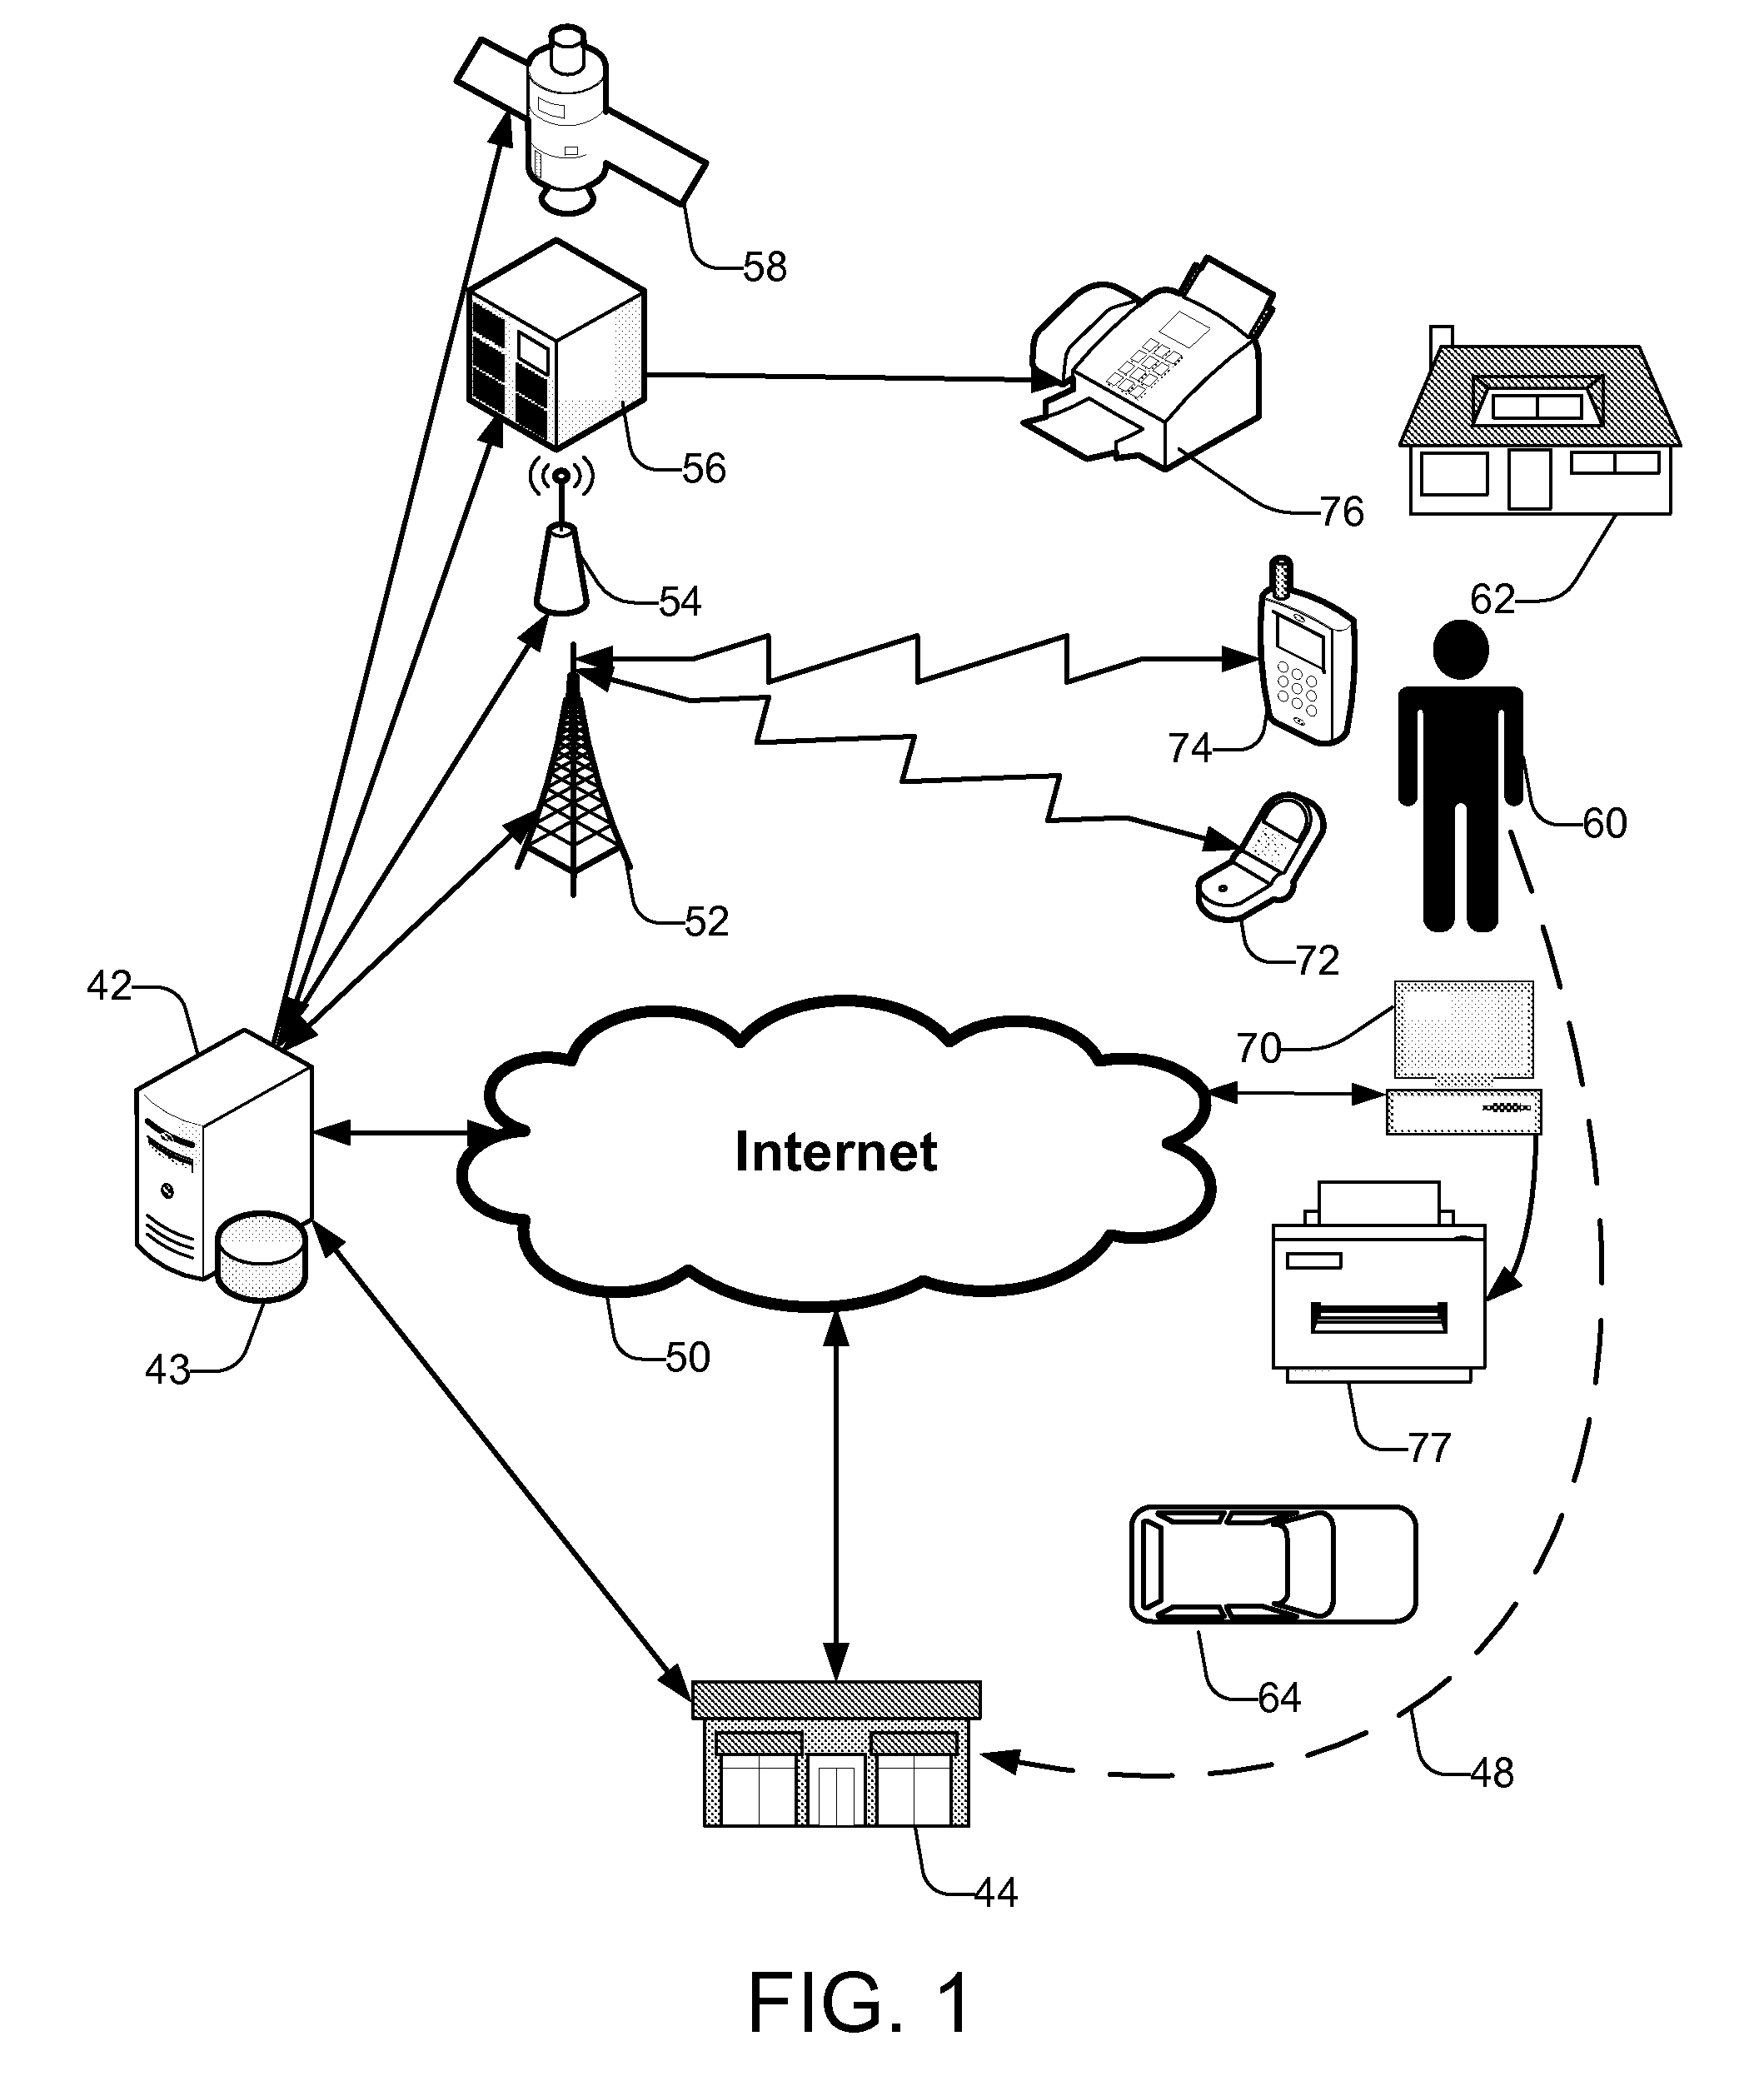 Method and System for Providing Discounted Services to Customers